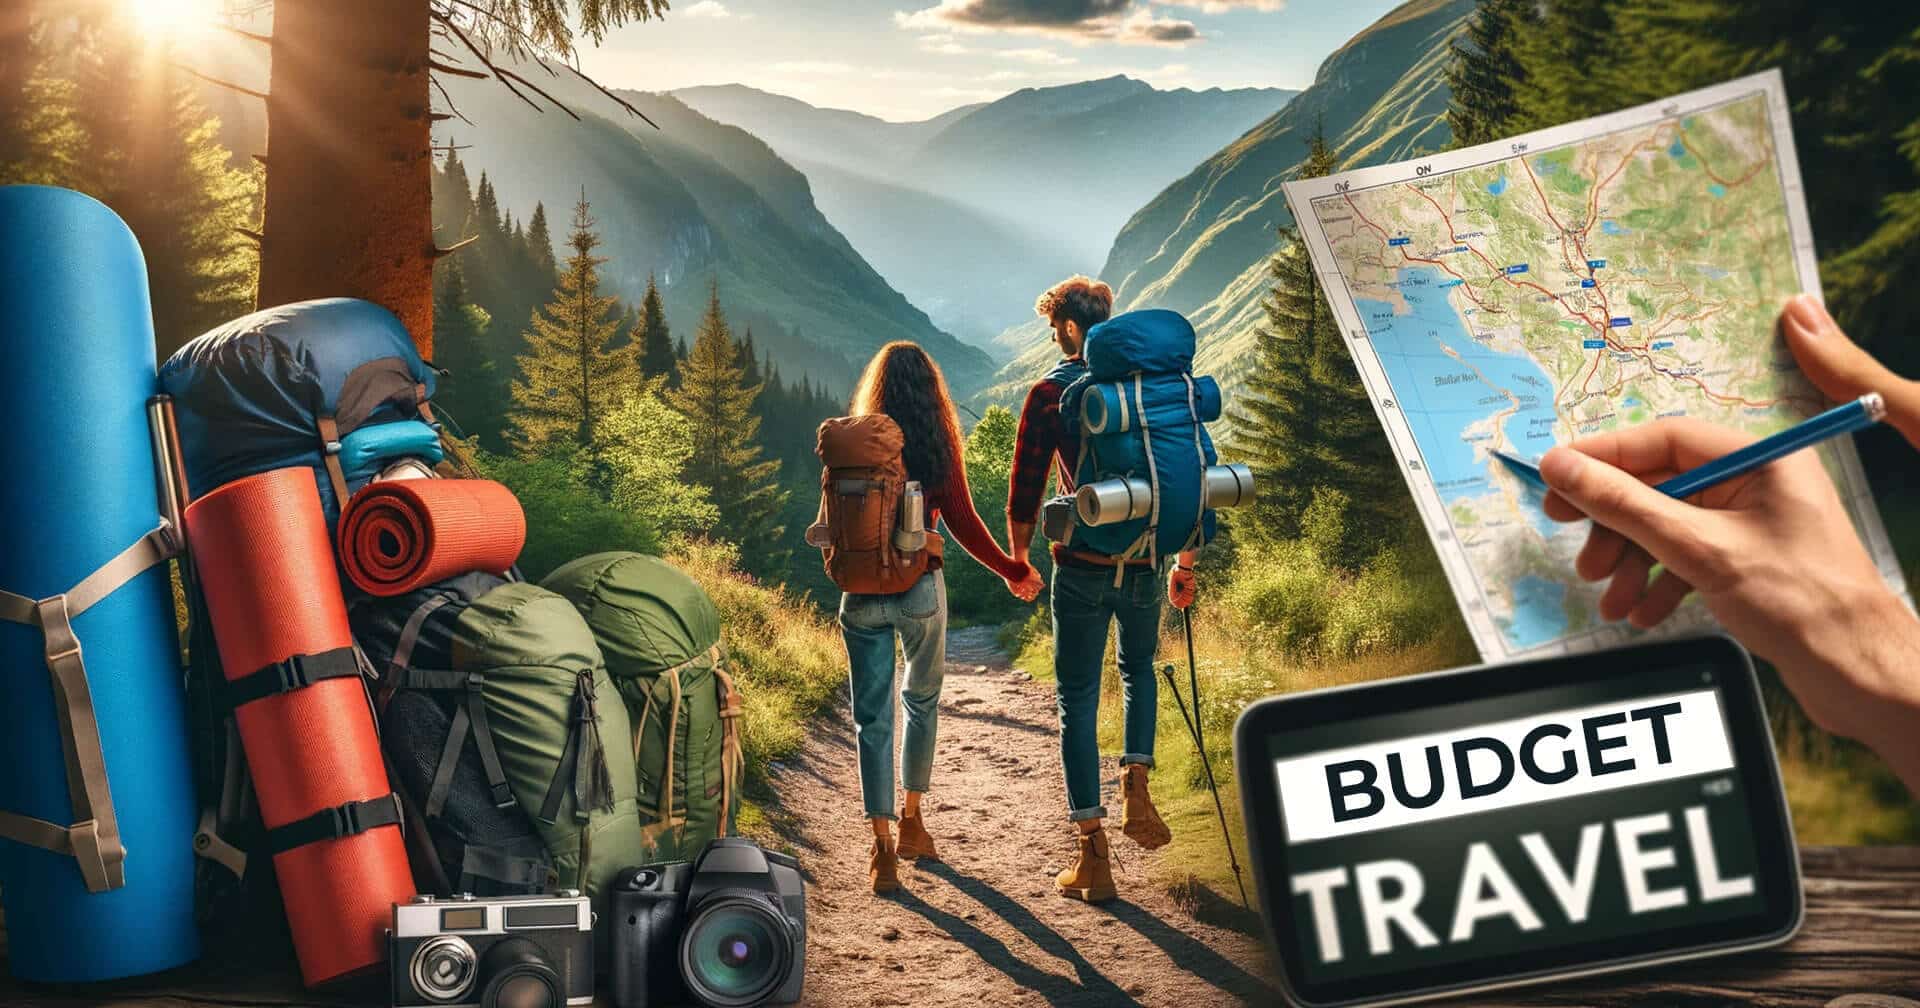 Travel and leisure on a budget, exploring with backpacks and a map.